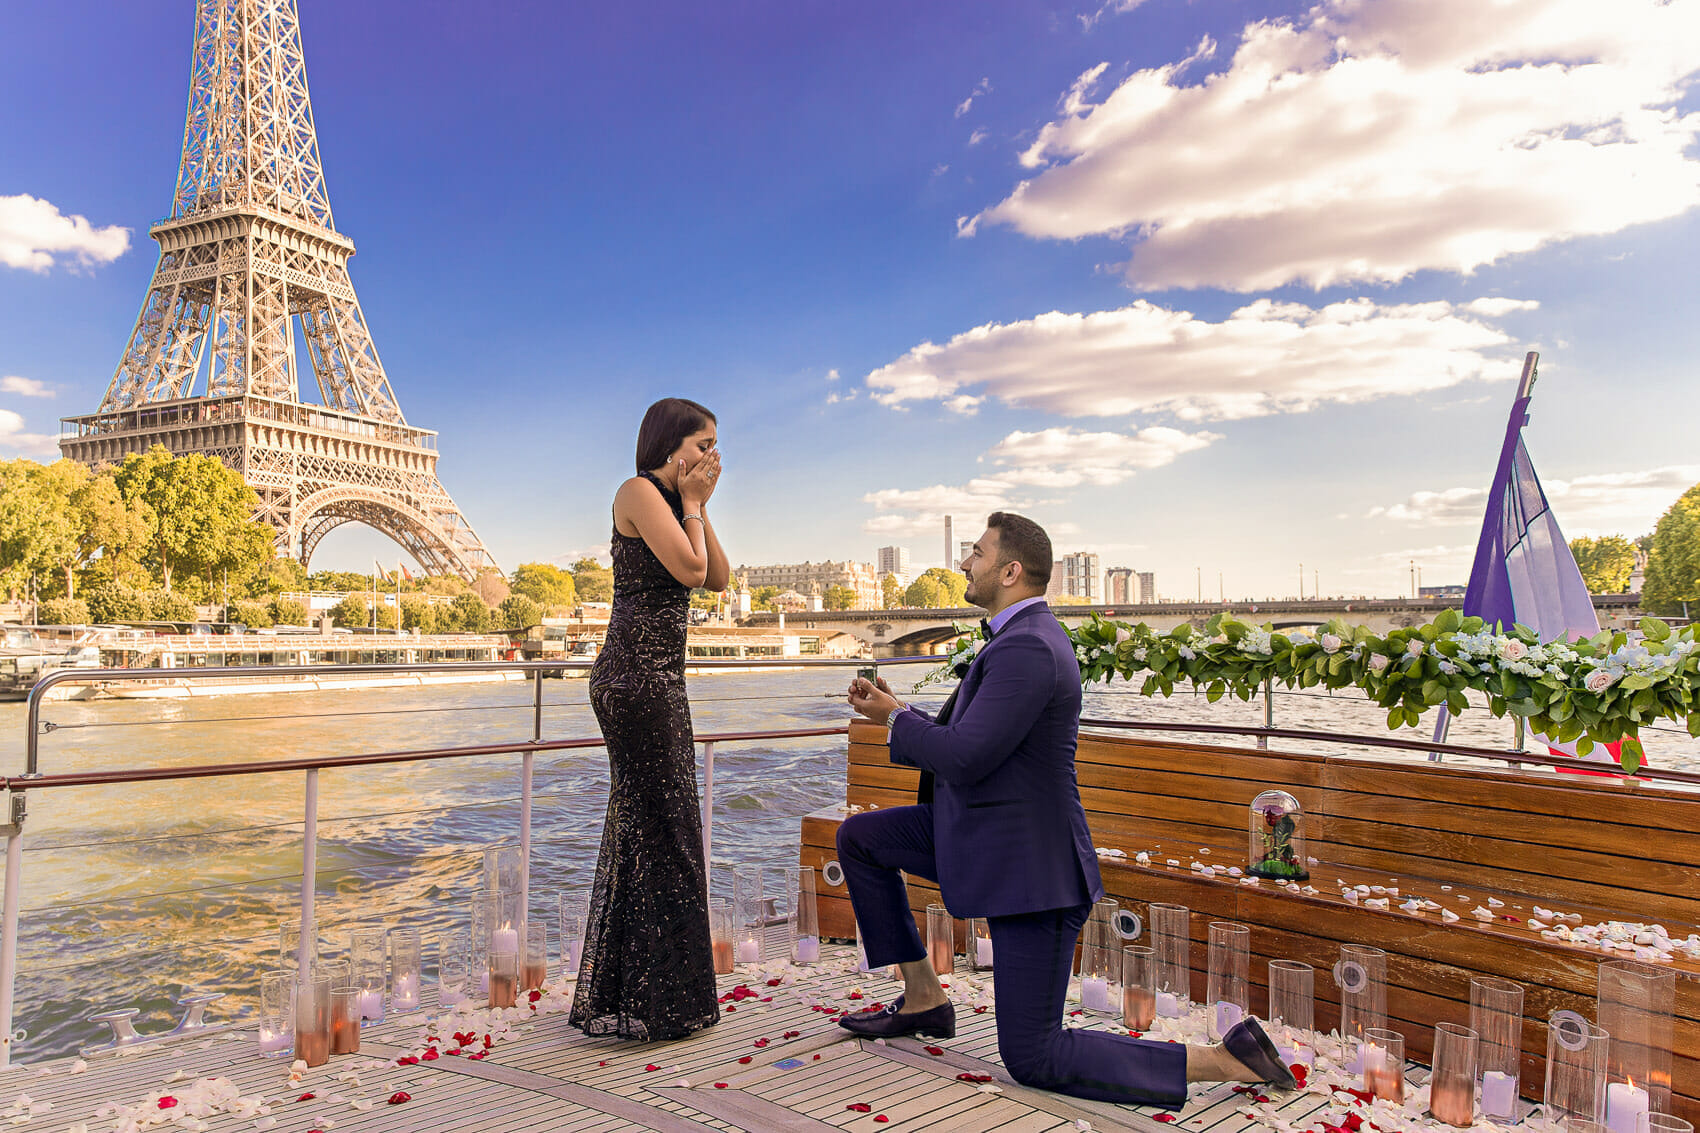 Eiffel Tower Proposal on the Seine River